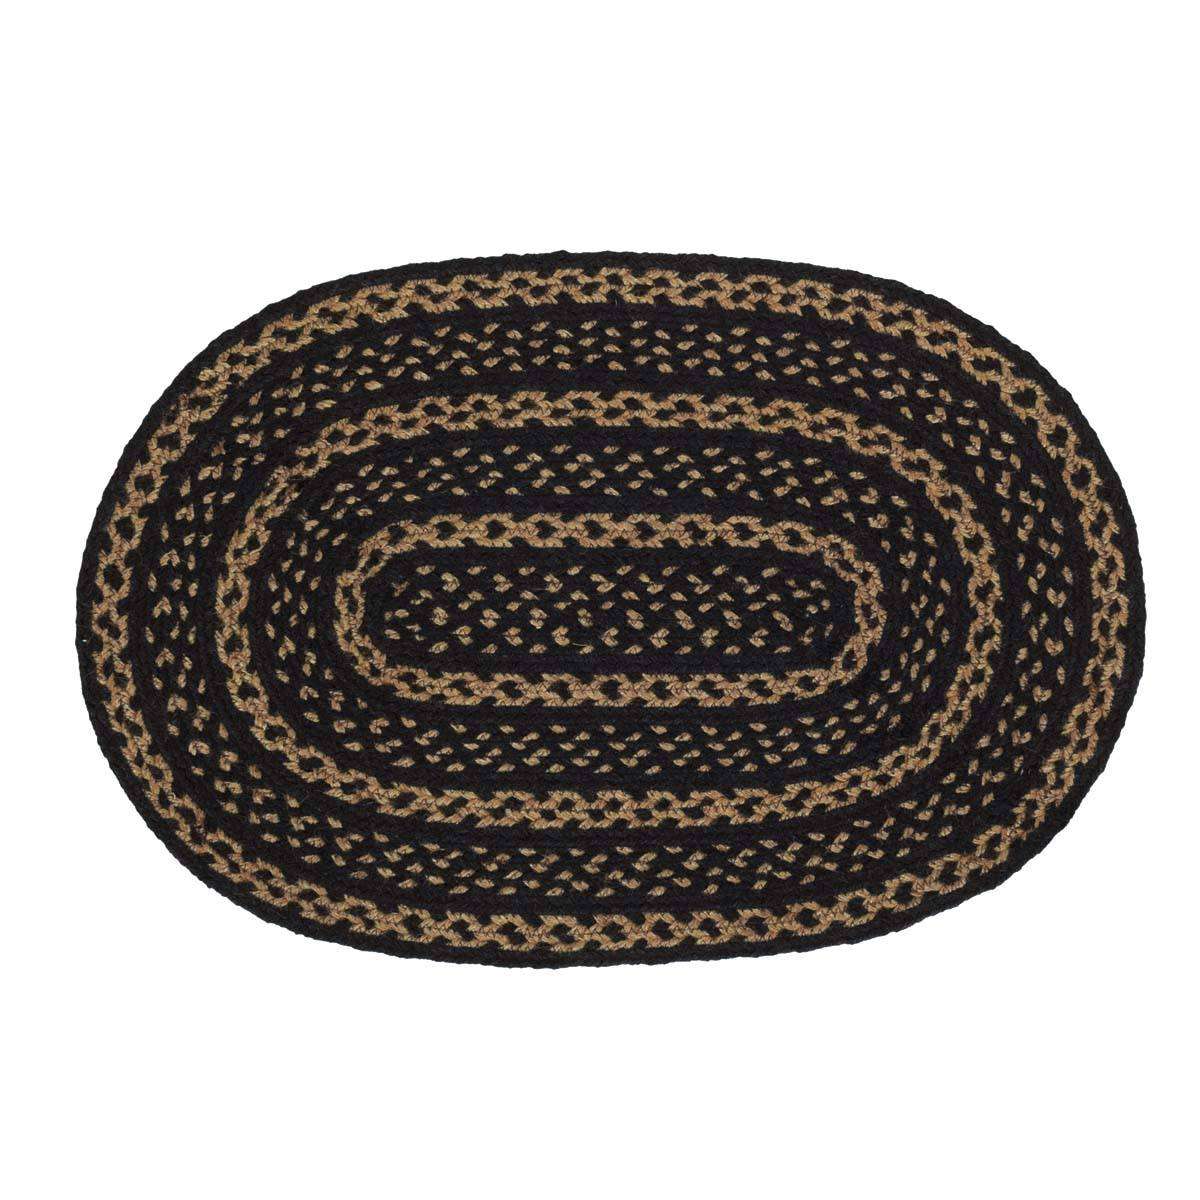 Farmhouse Jute Braided Rugs Oval VHC Brands Rugs VHC Brands 20" x 30" 